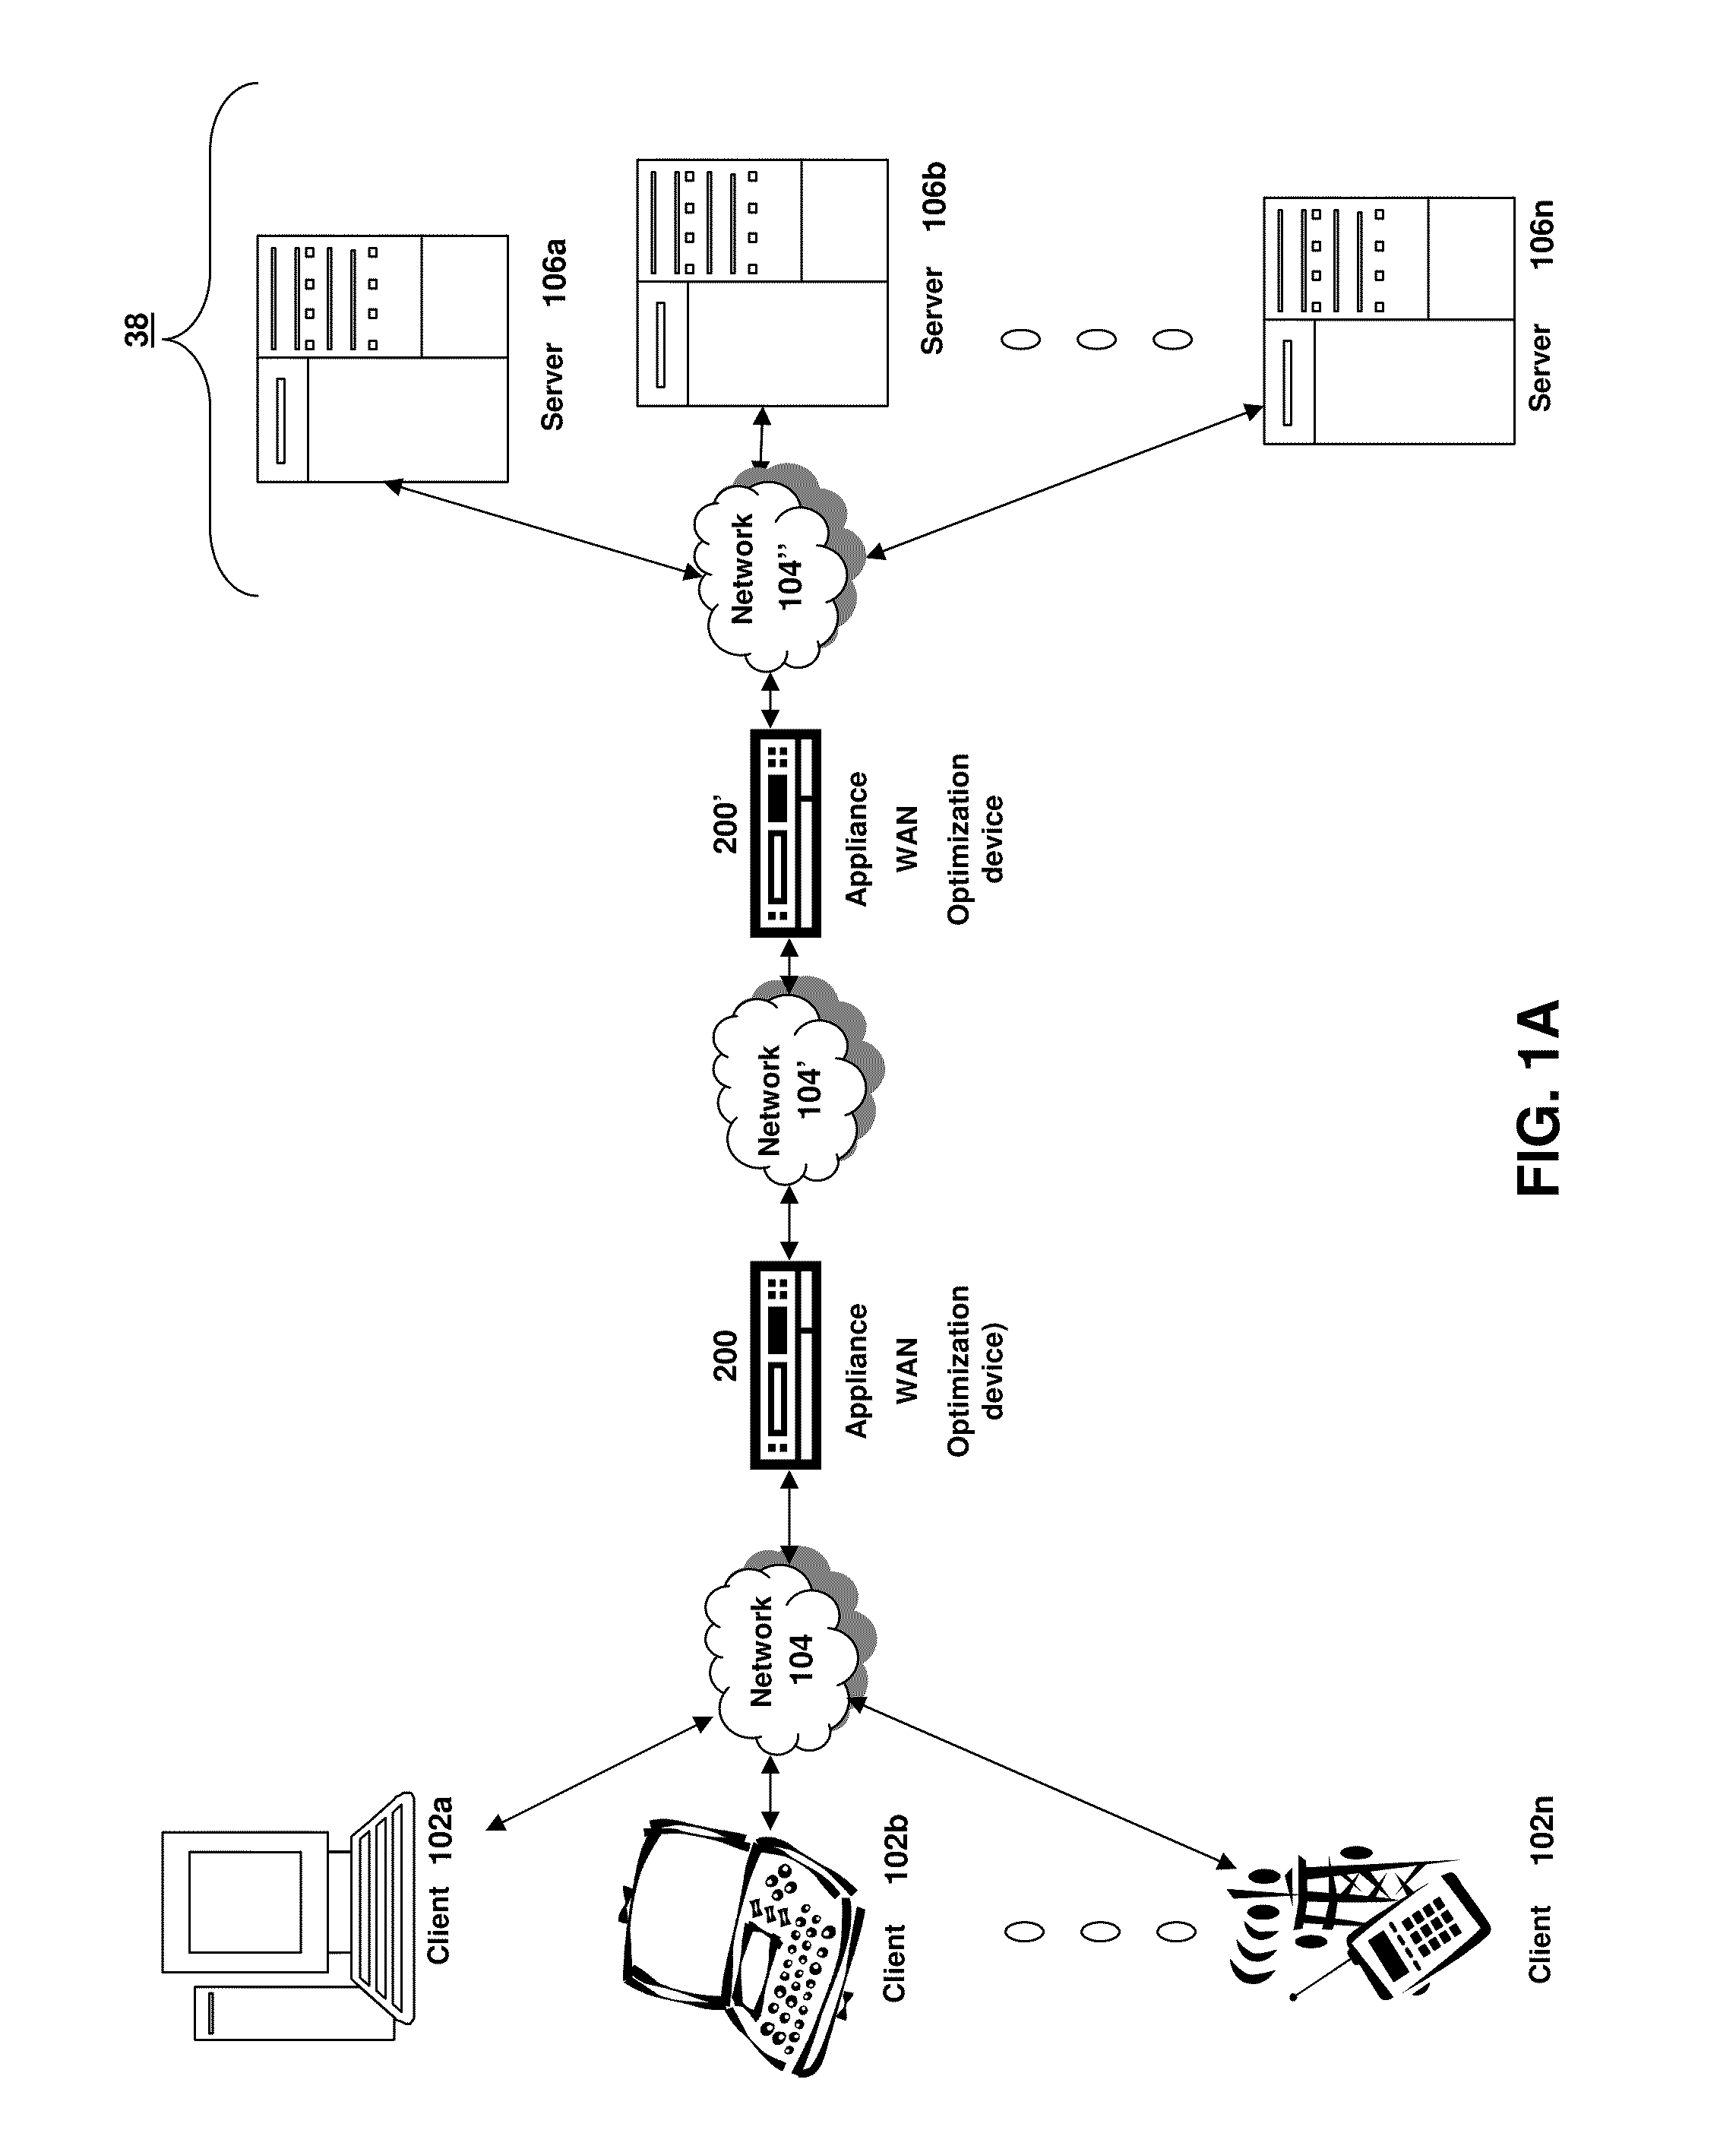 Systems and methods for allocating bandwidth by an intermediary for flow control